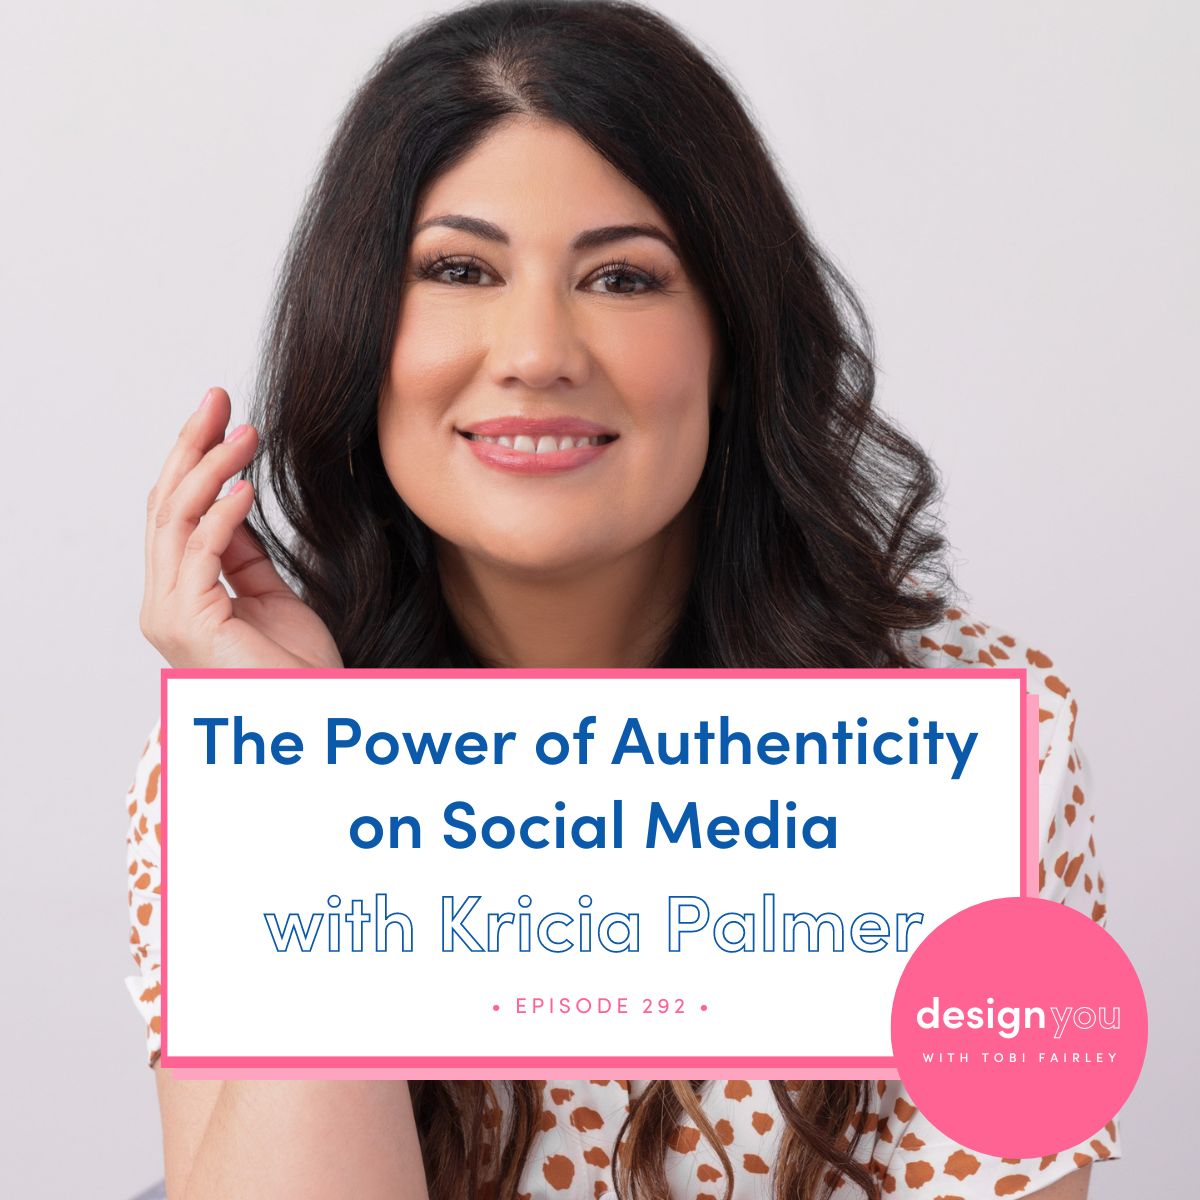 The Design You Podcast with Tobi Fairley | The Power of Authenticity on Social Media with Kricia Palmer